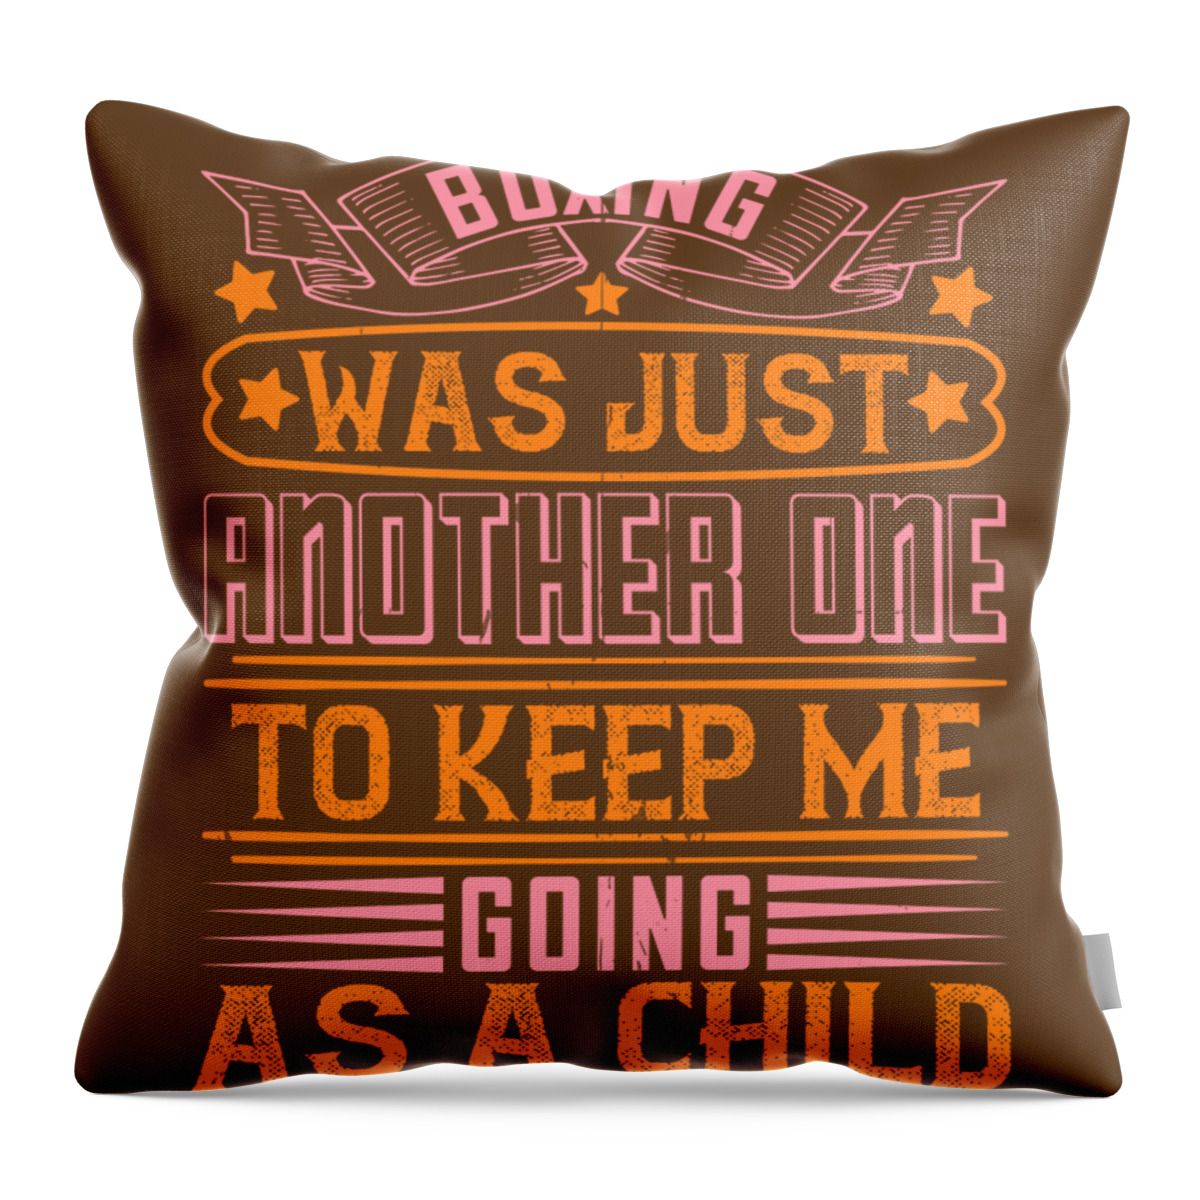 Boxing Throw Pillow featuring the digital art Boxing Gift Boxing Was Just Another One To Keep Me Going As A Child by Jeff Creation